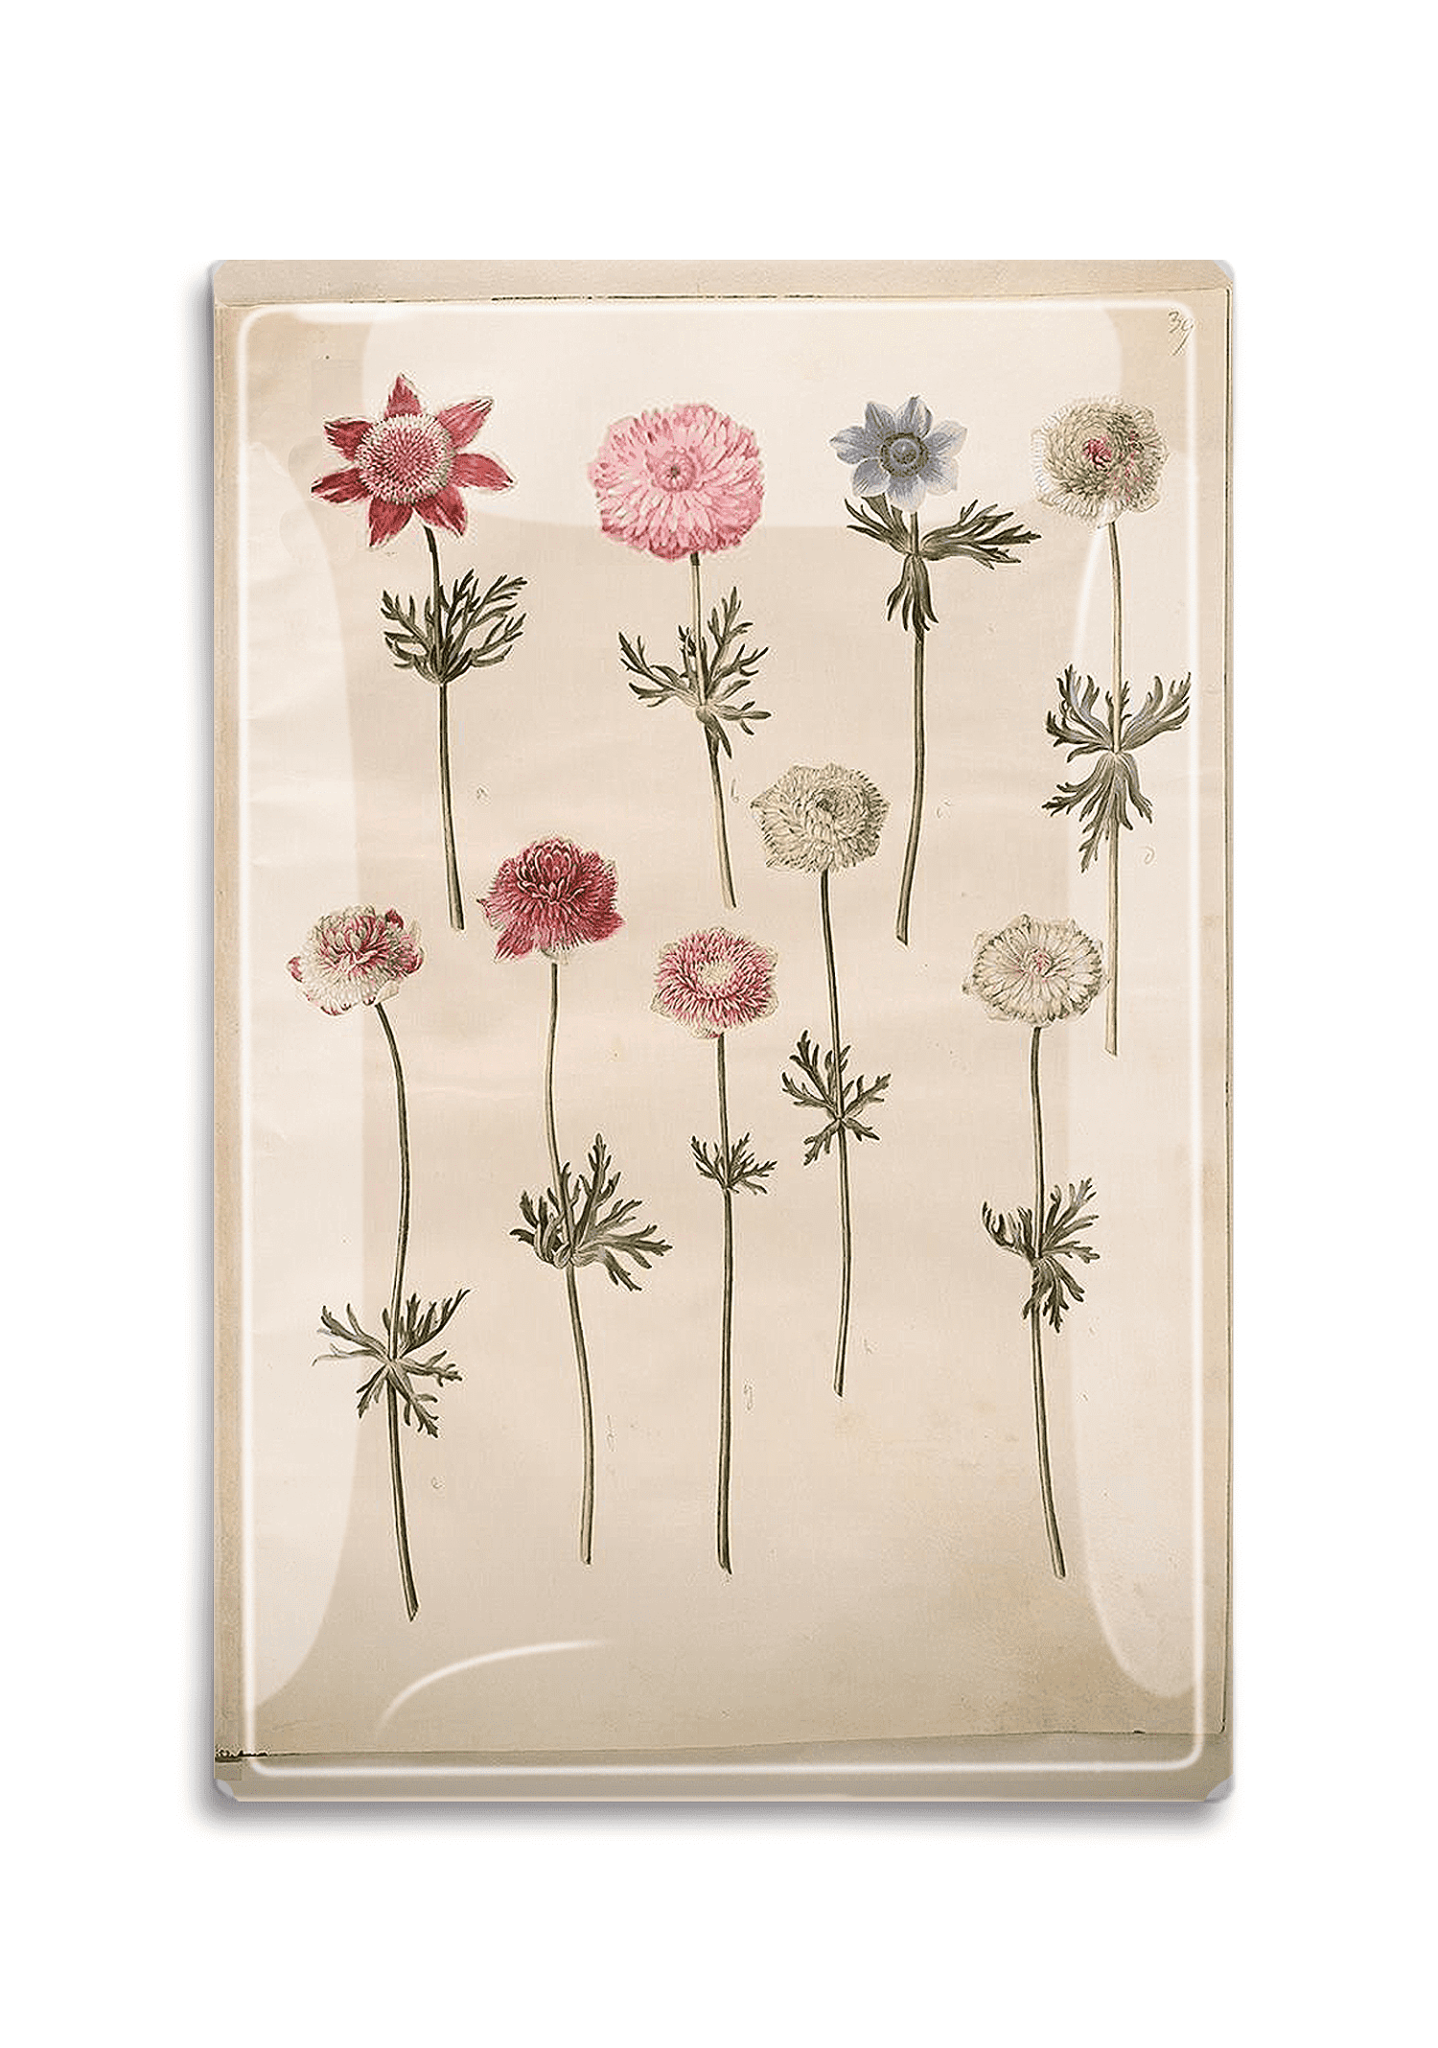 Anemone Collection Botany Decoupage Glass Tray - Bensgarden.com